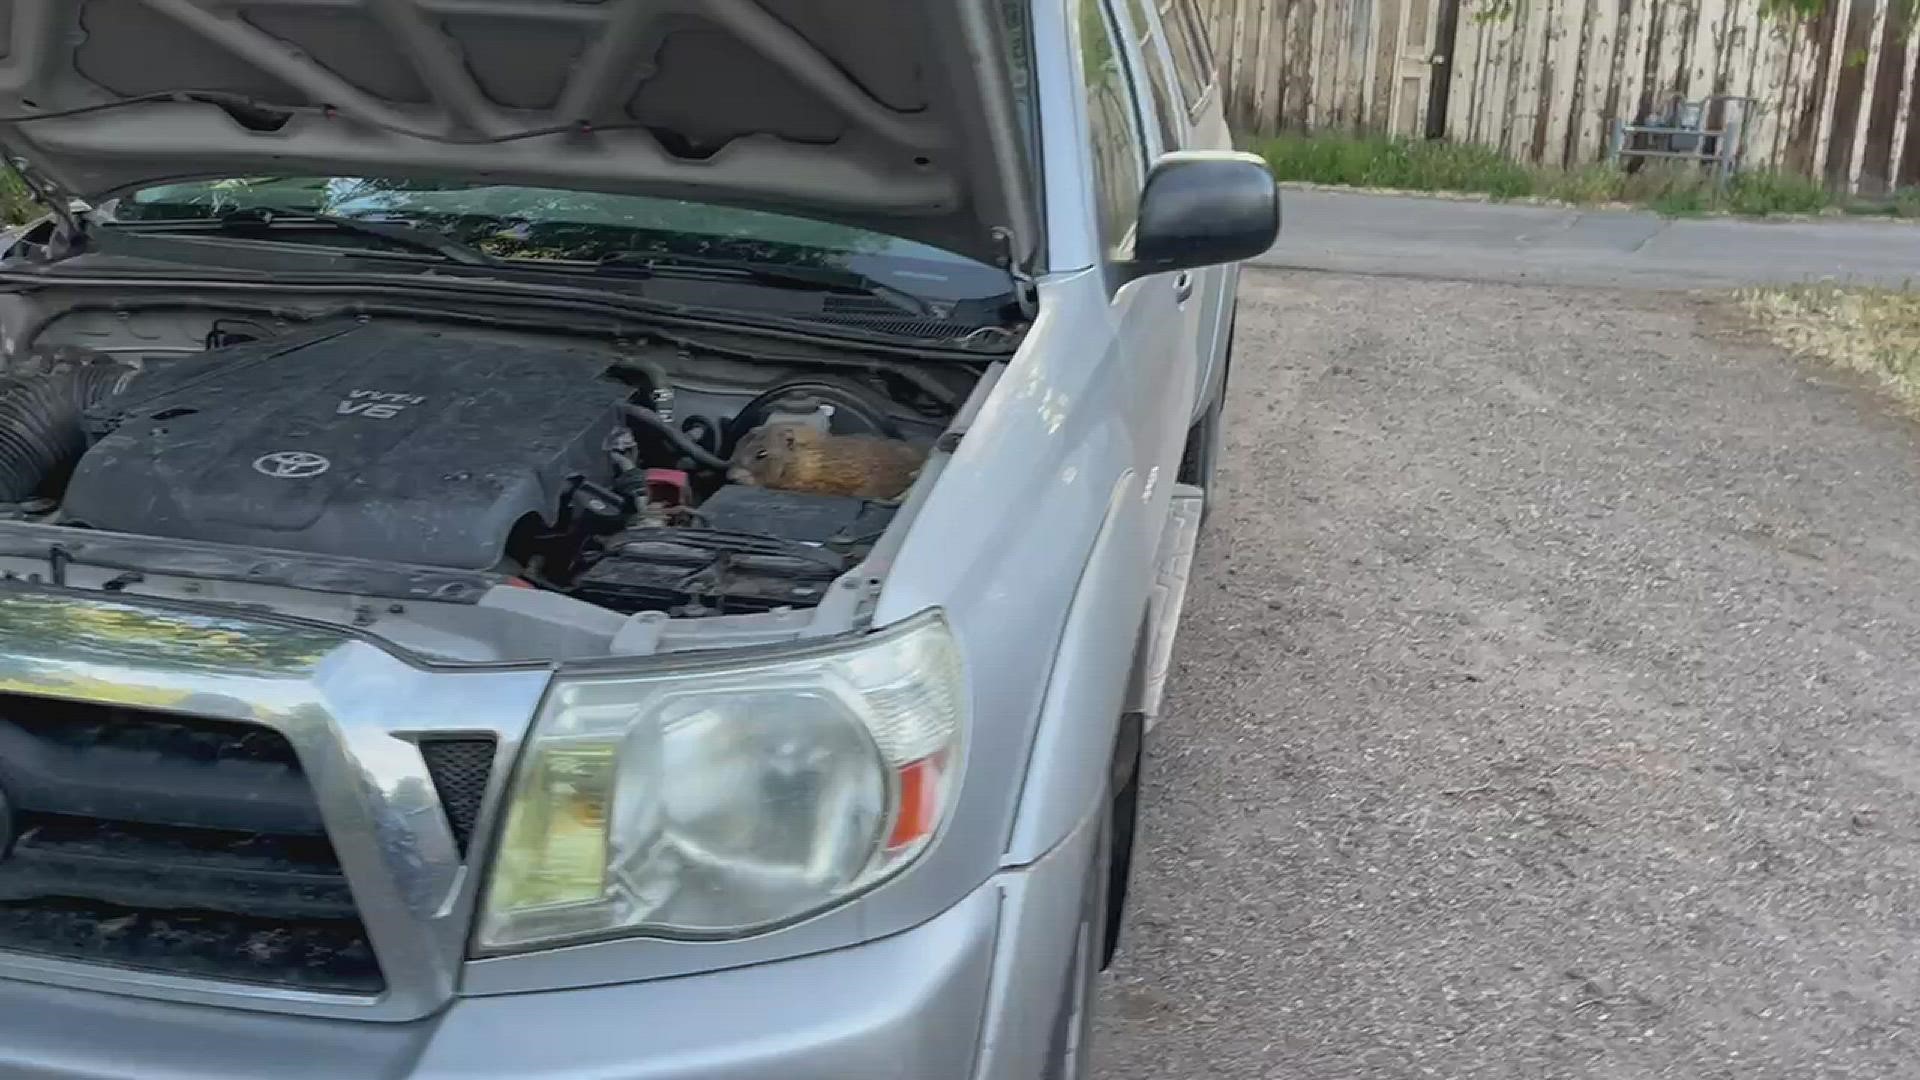 A Durango man found the two furry stowaways inside the engine compartment of his truck after hiking in La Plata Canyon.